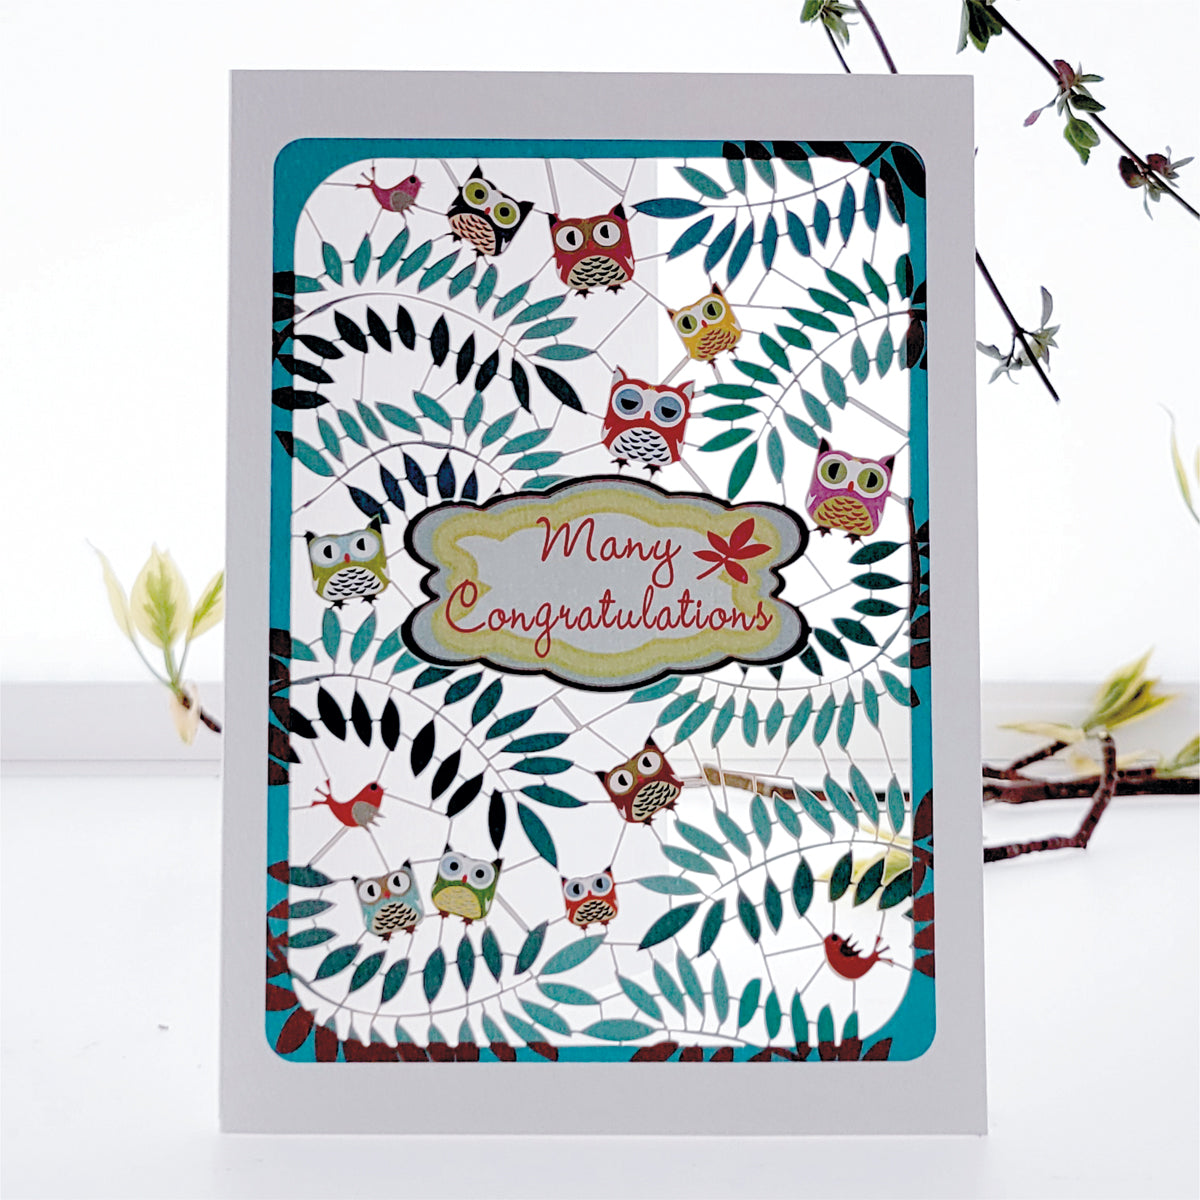 ''Many Congratulations'' - Owls and Ferns - Anniversary Card, #PM-819